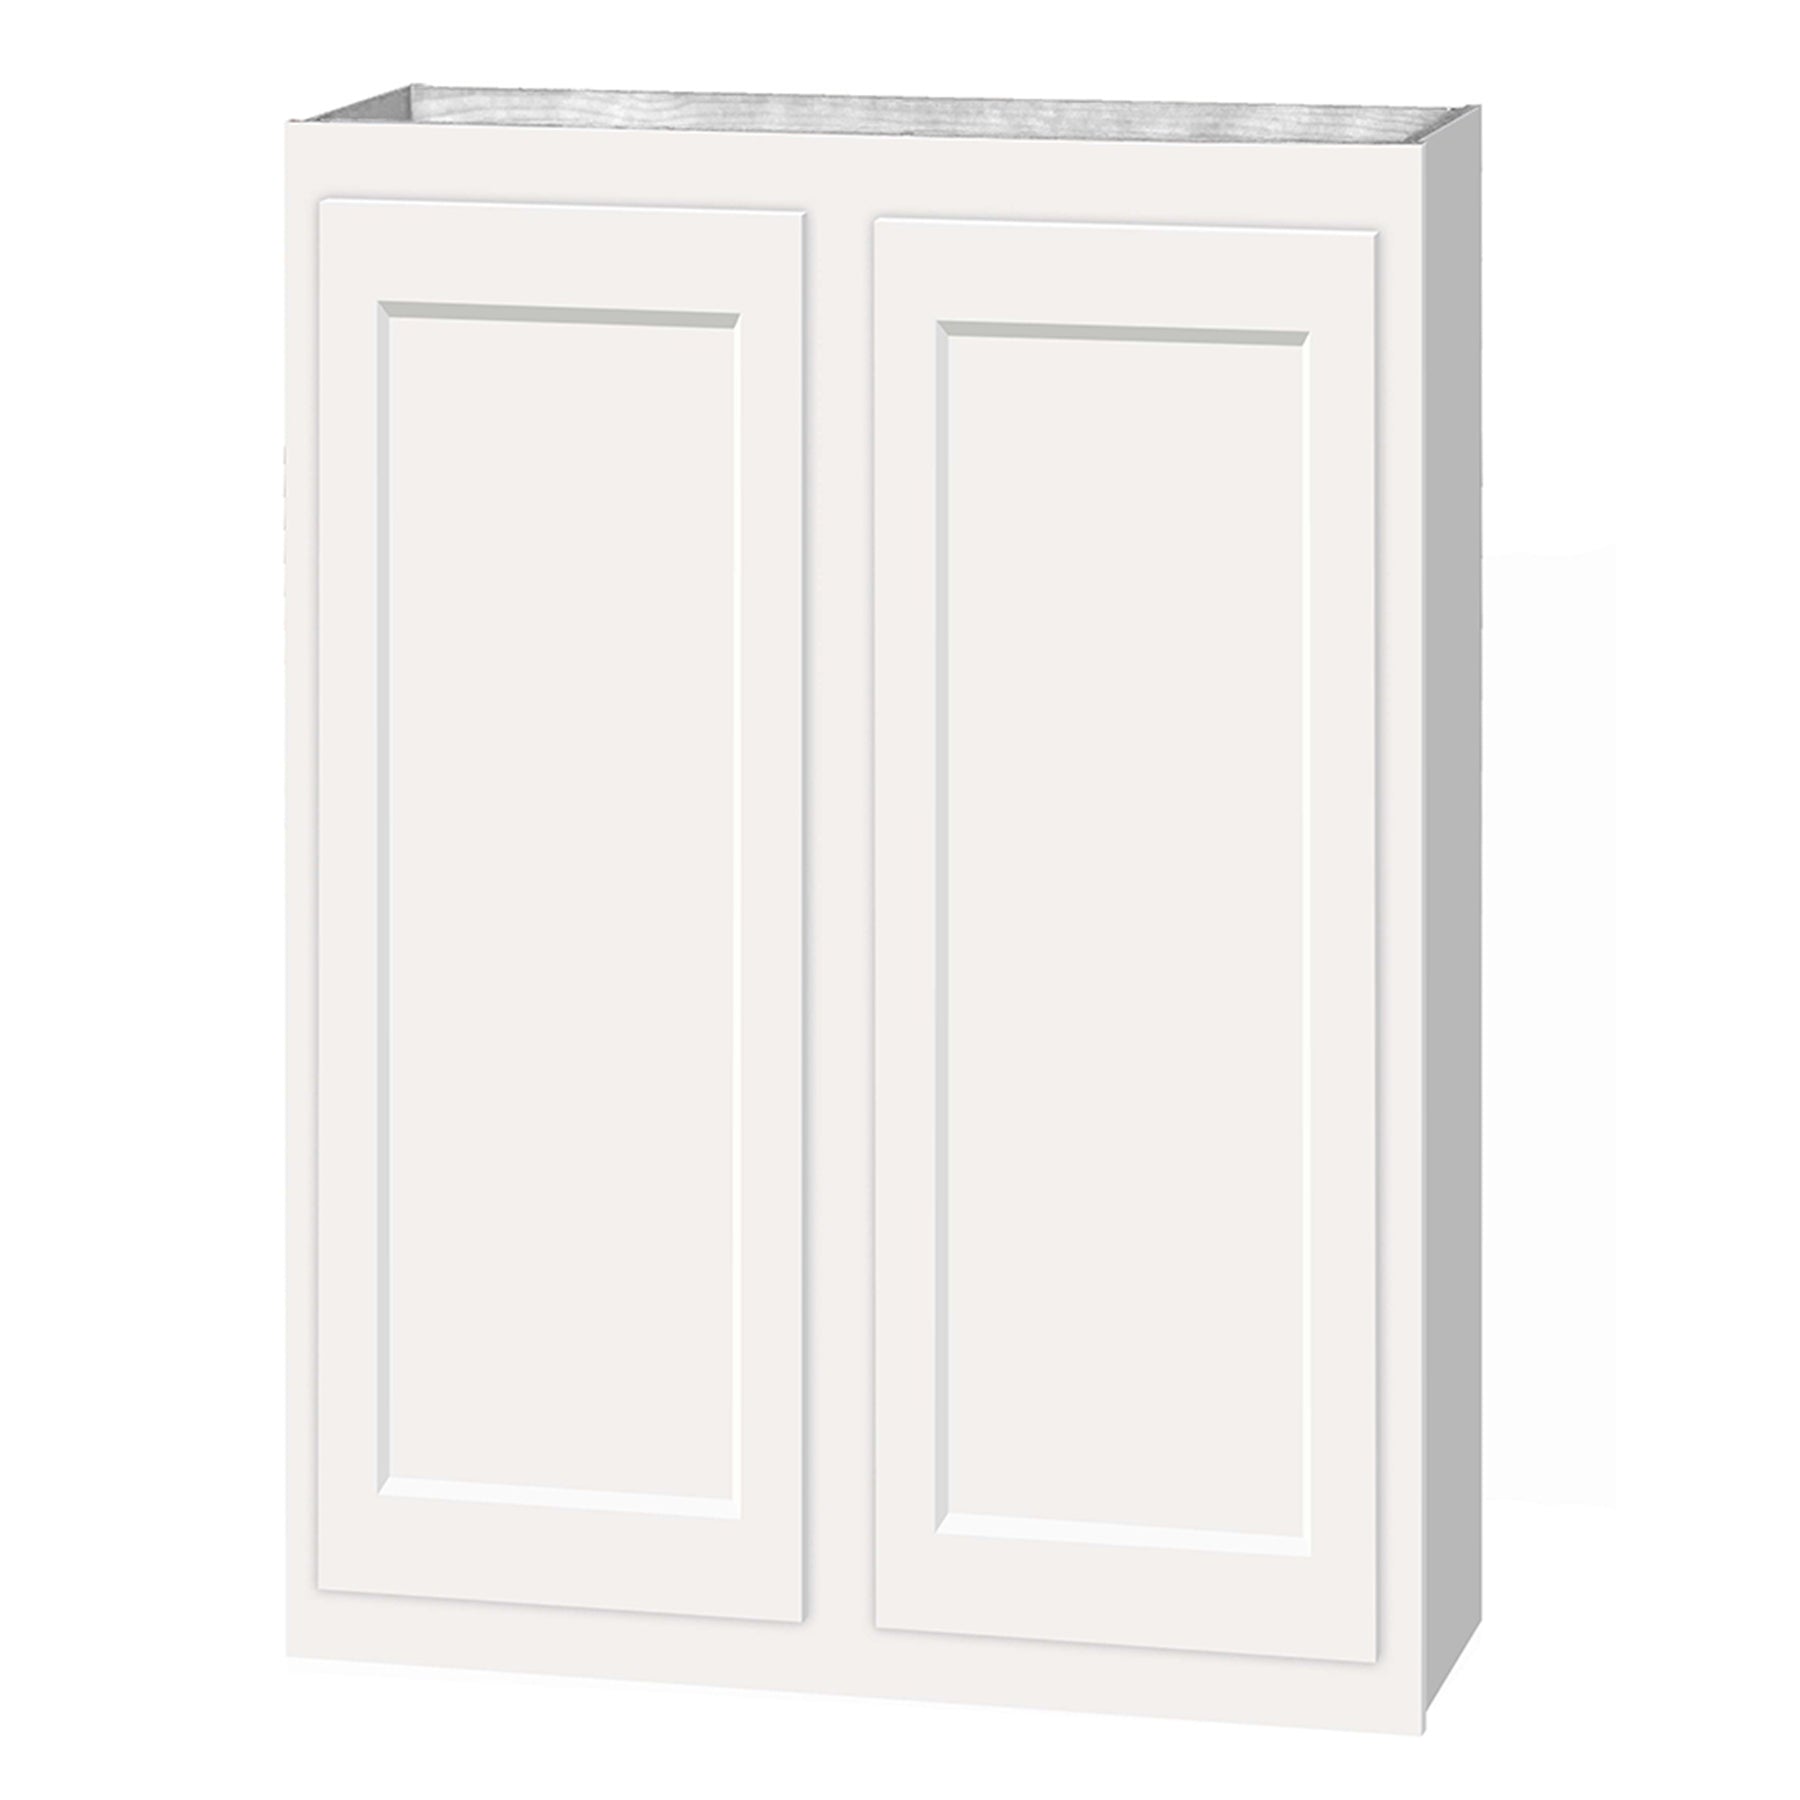 36 inch Wall Cabinets - Dwhite Shaker - 30 Inch W x 36 Inch H x 12 Inch D